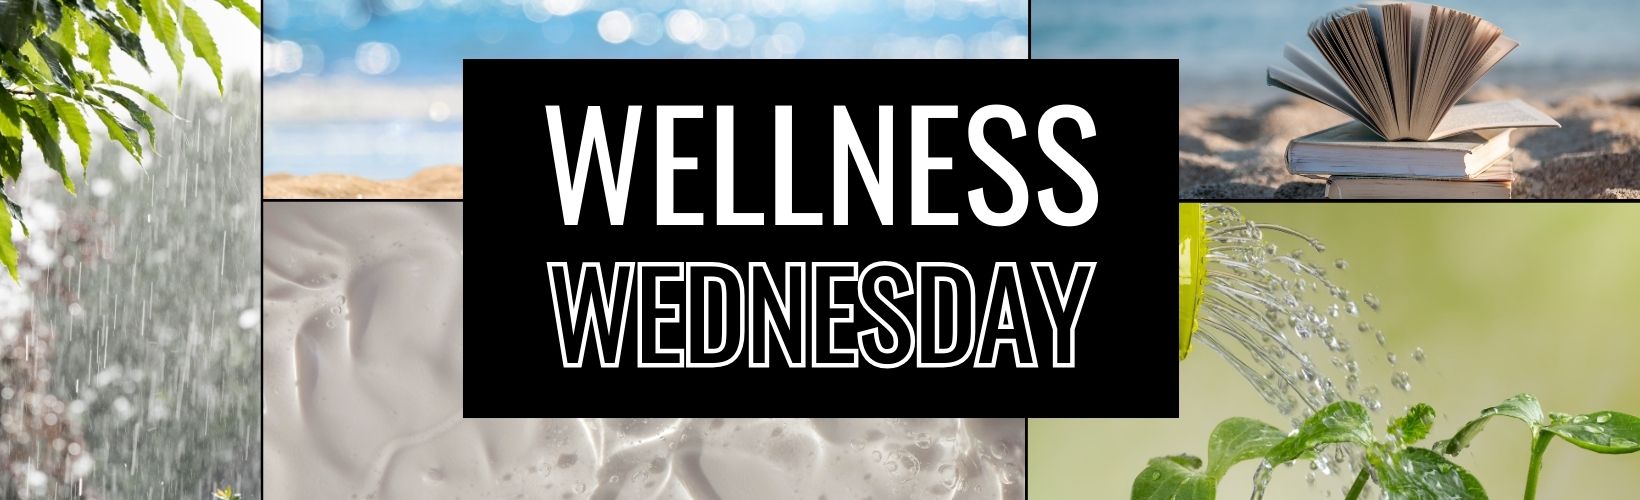 Wellness Wednesday: How to Strengthen Your Bond with Your Parents